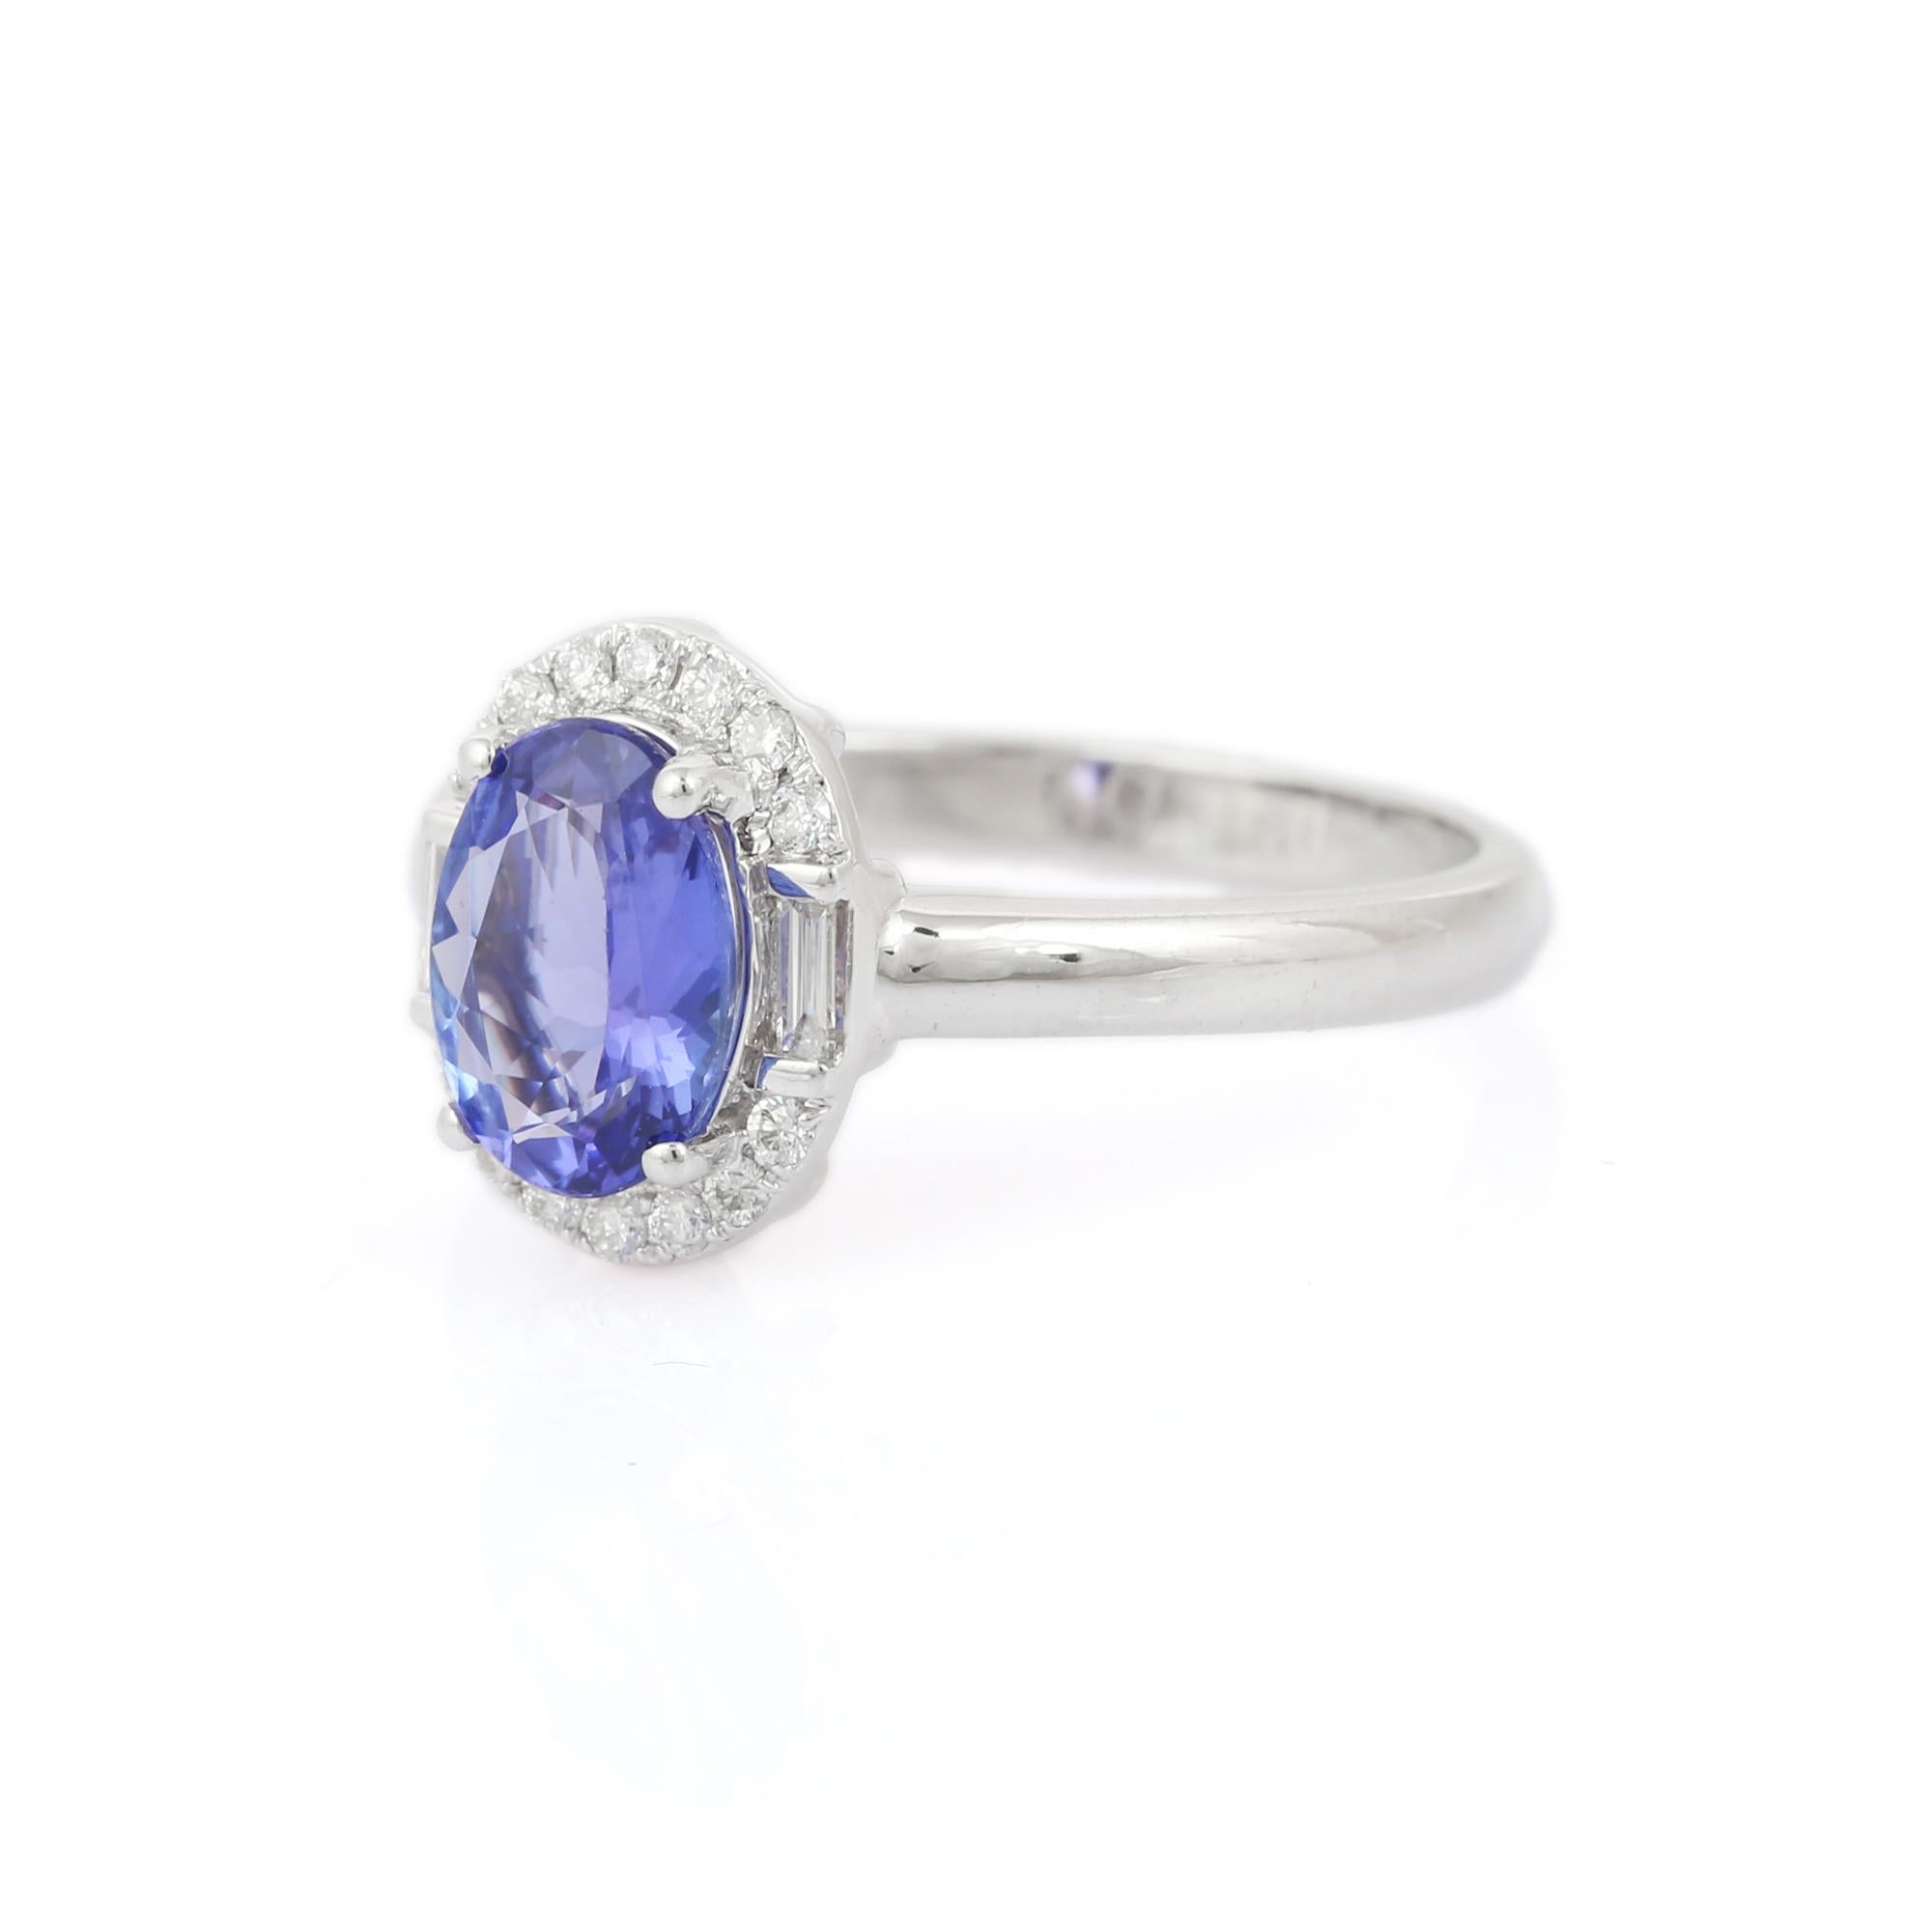 For Sale:  Oval Shape Tanzanite and Diamond Wedding Ring in 18k Solid White Gold 2